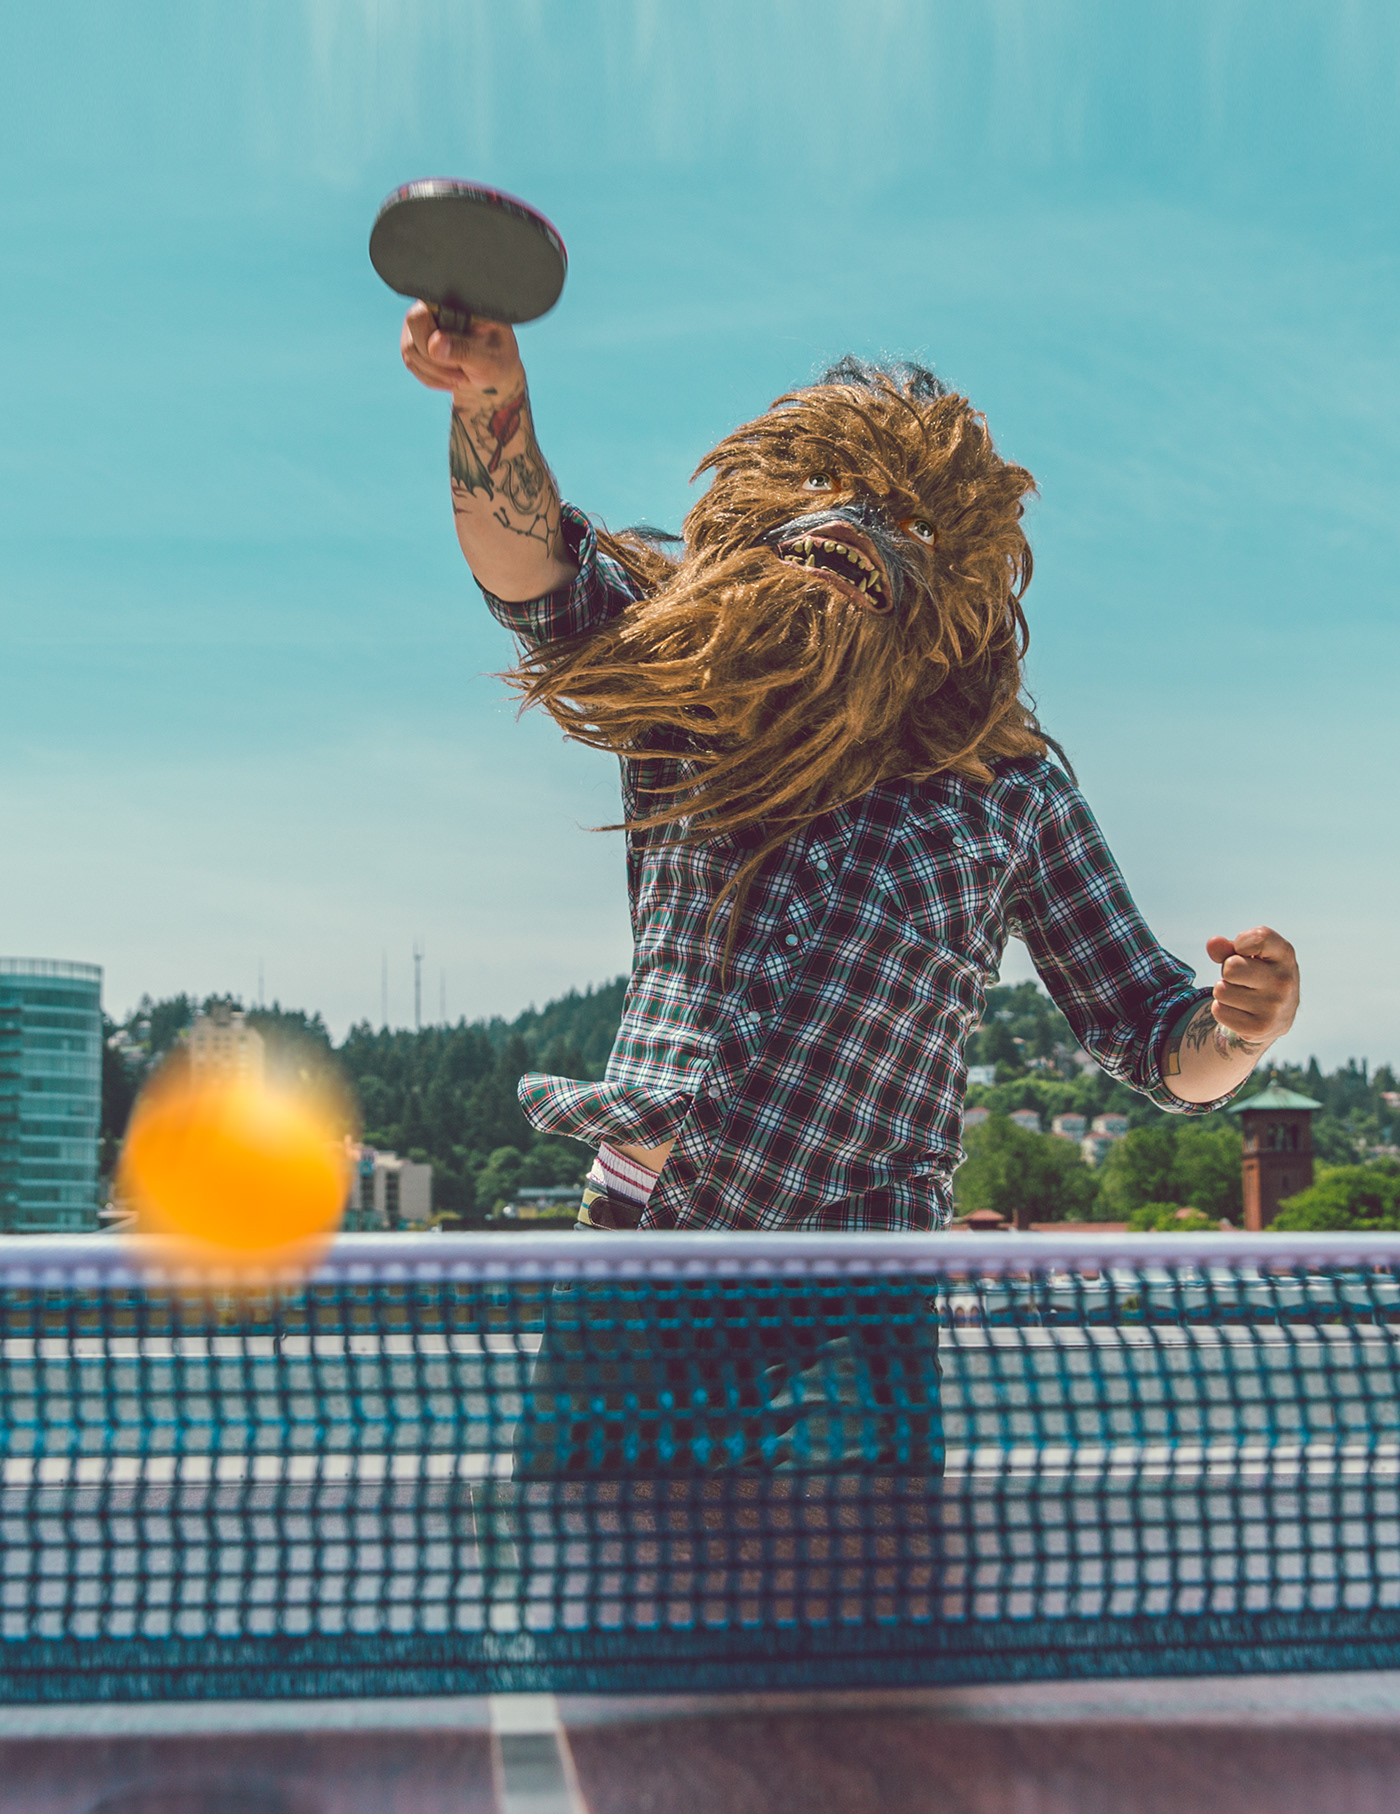 ping pong Wookie rooftop city game table red ball Paddle Portland pdx net tennis ace